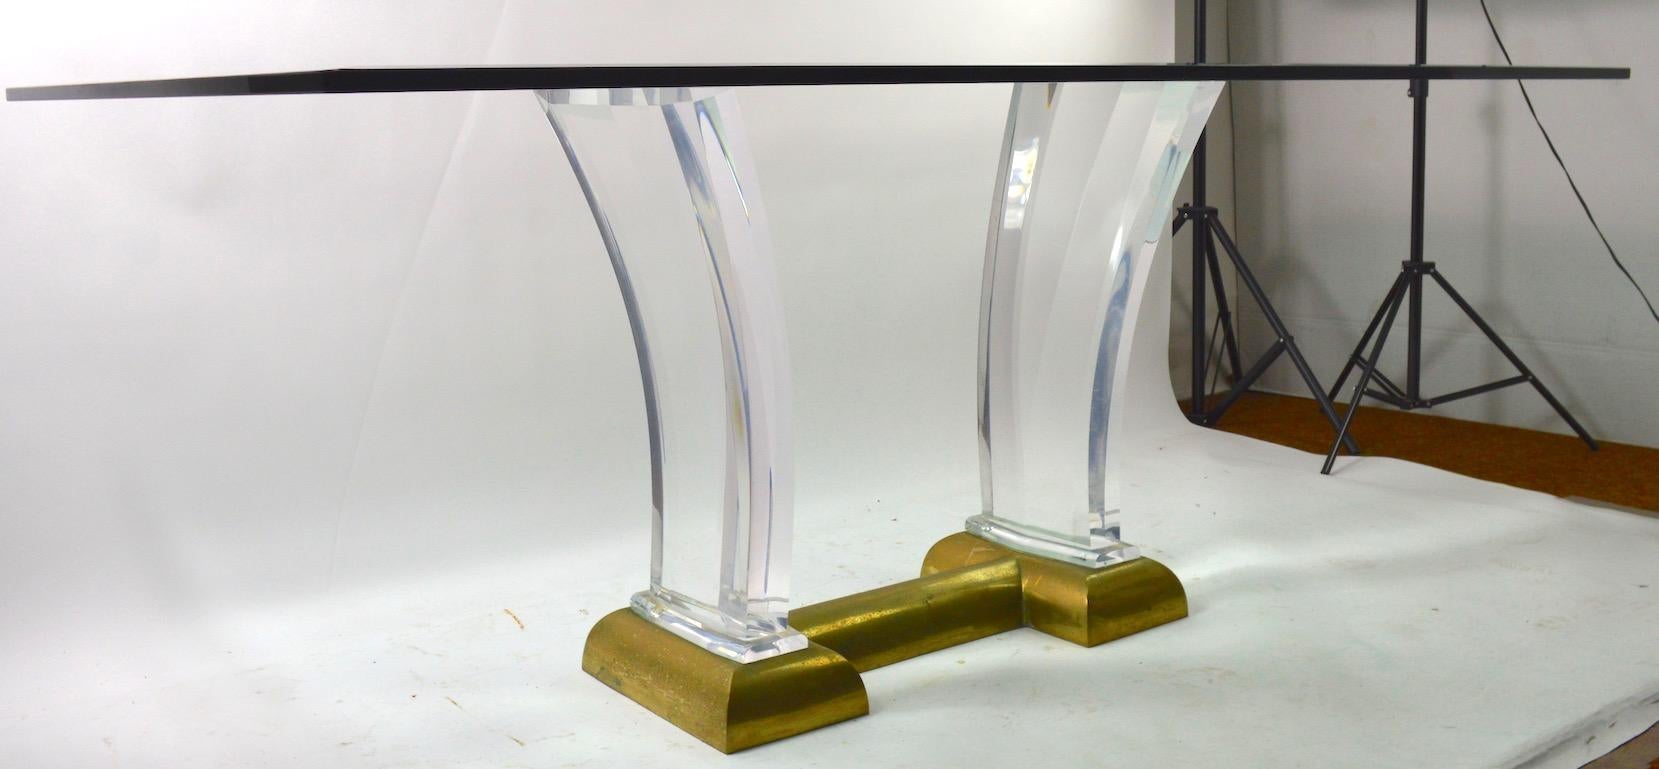 Large Lucite Brass and Glass Dining Table by Jeffrey Bigelow For Sale 7